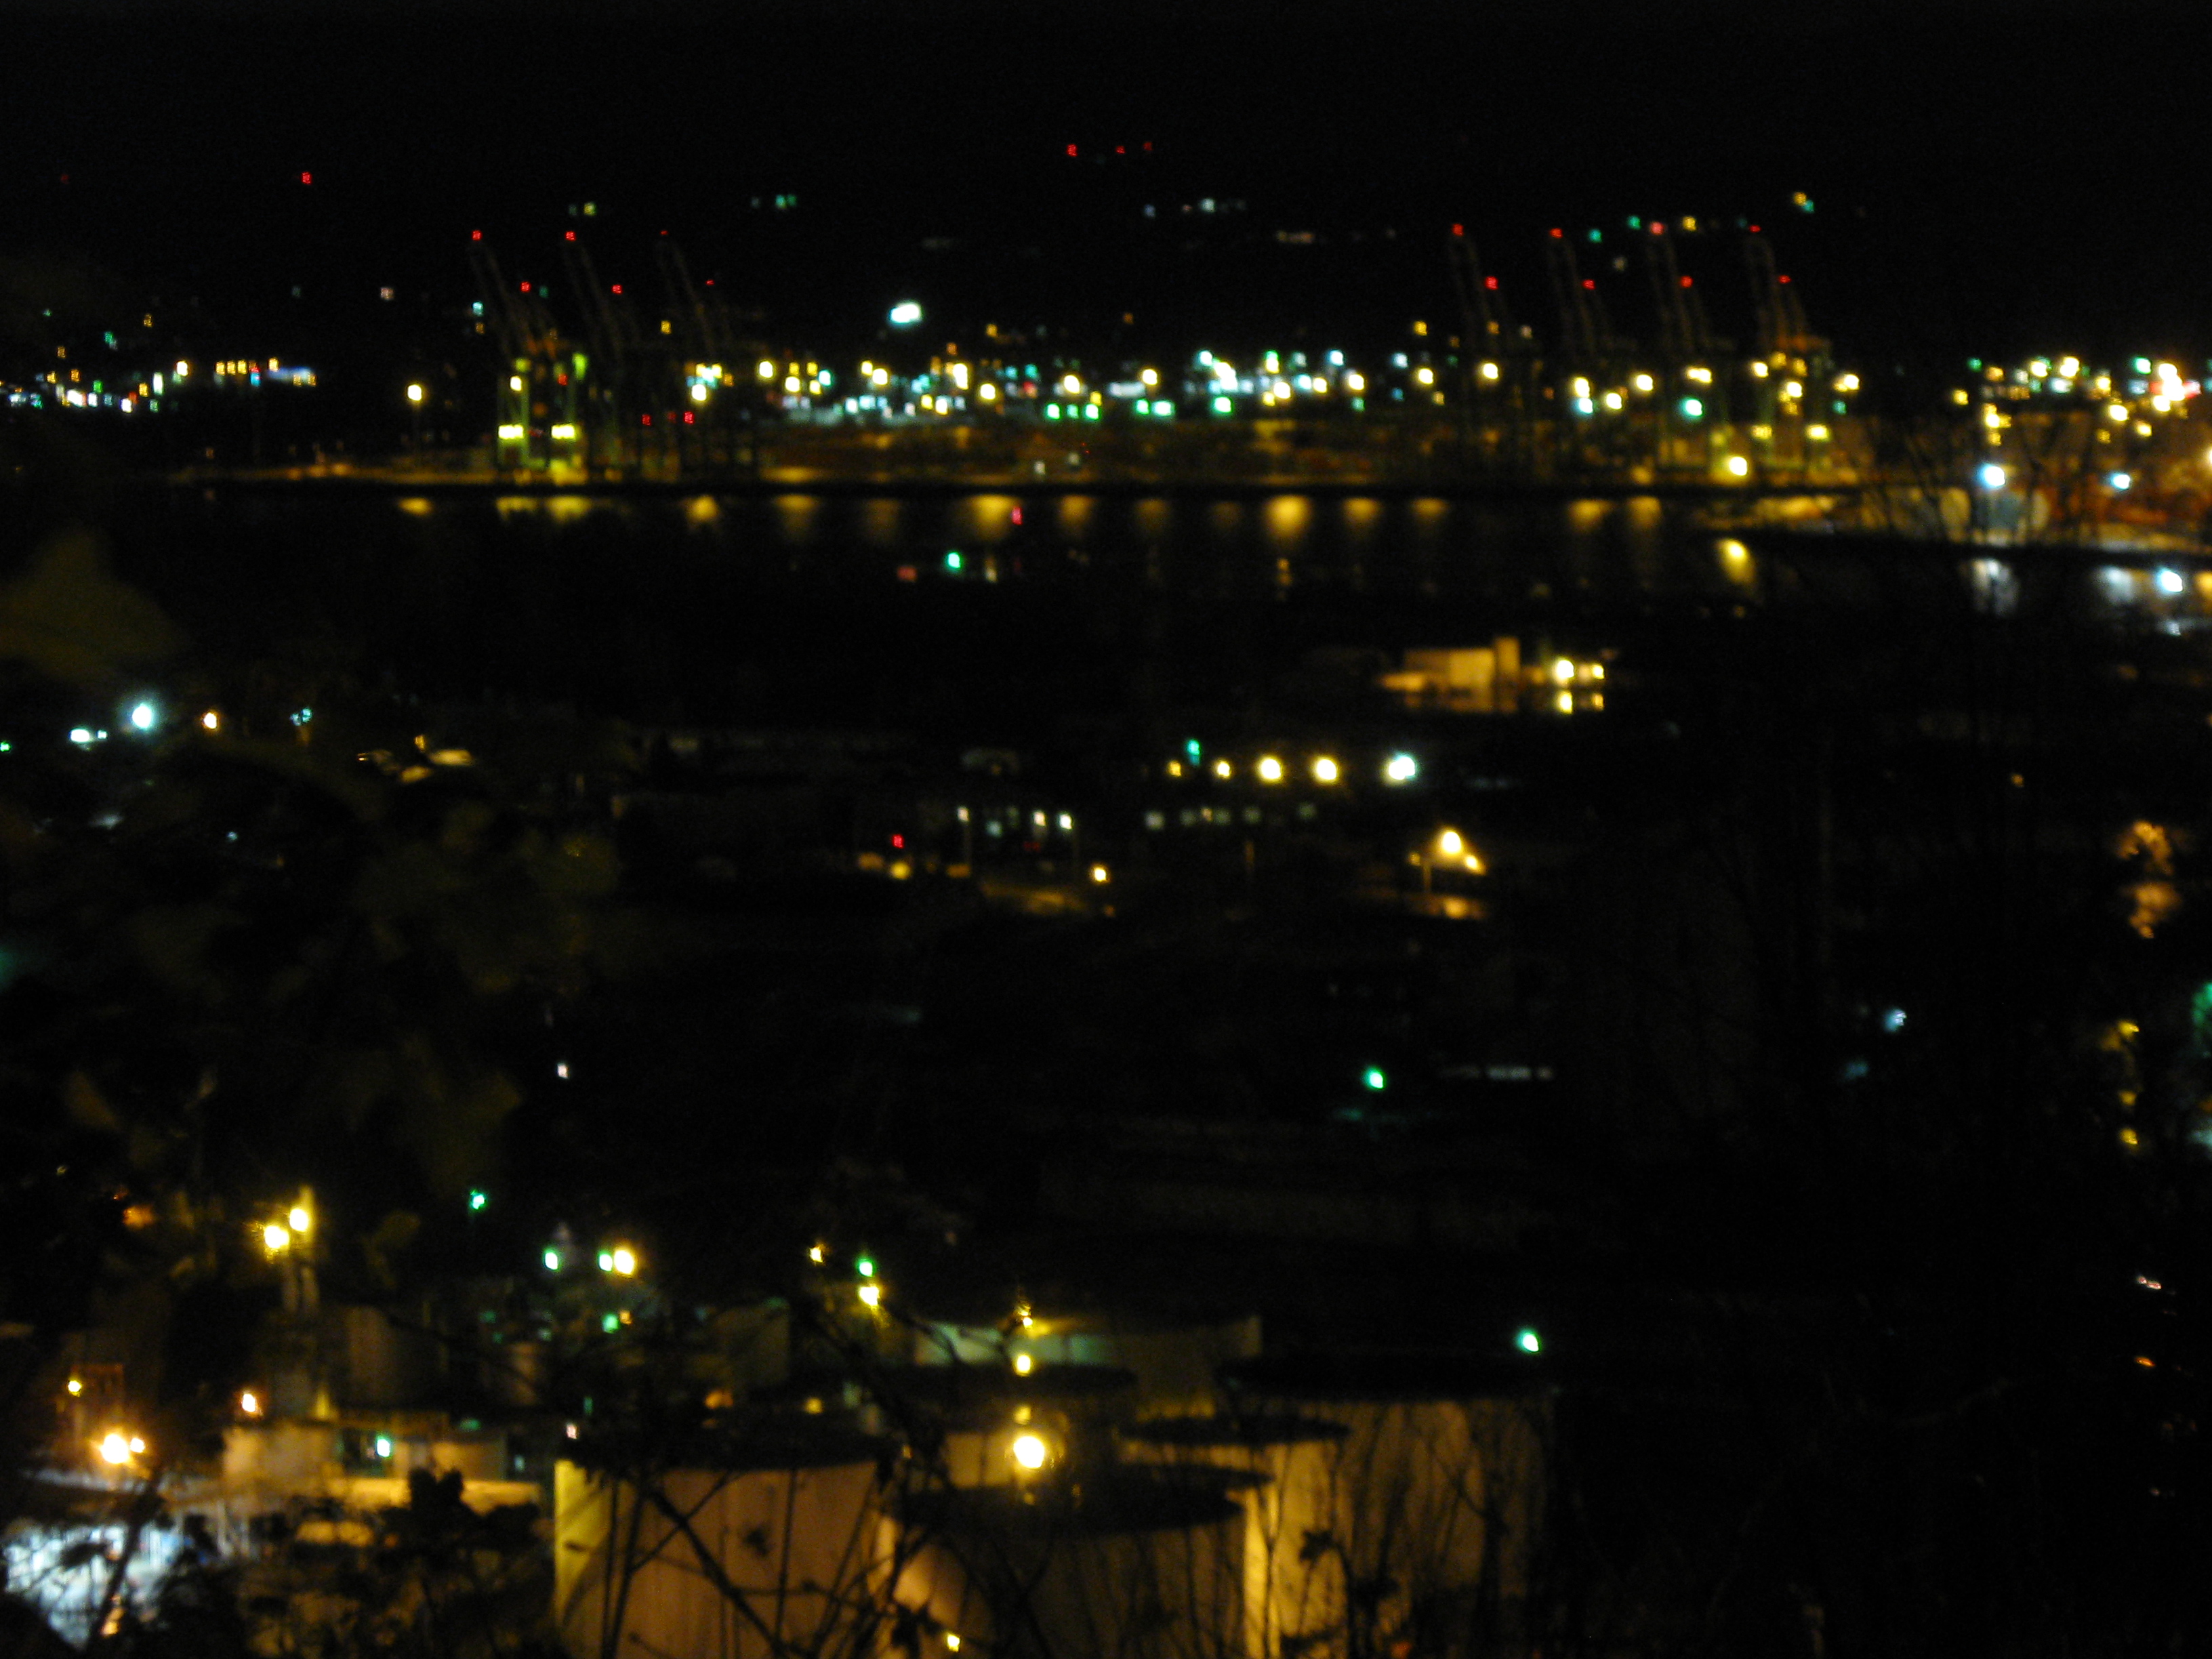 City from hillside near missy's place at night 3 photo